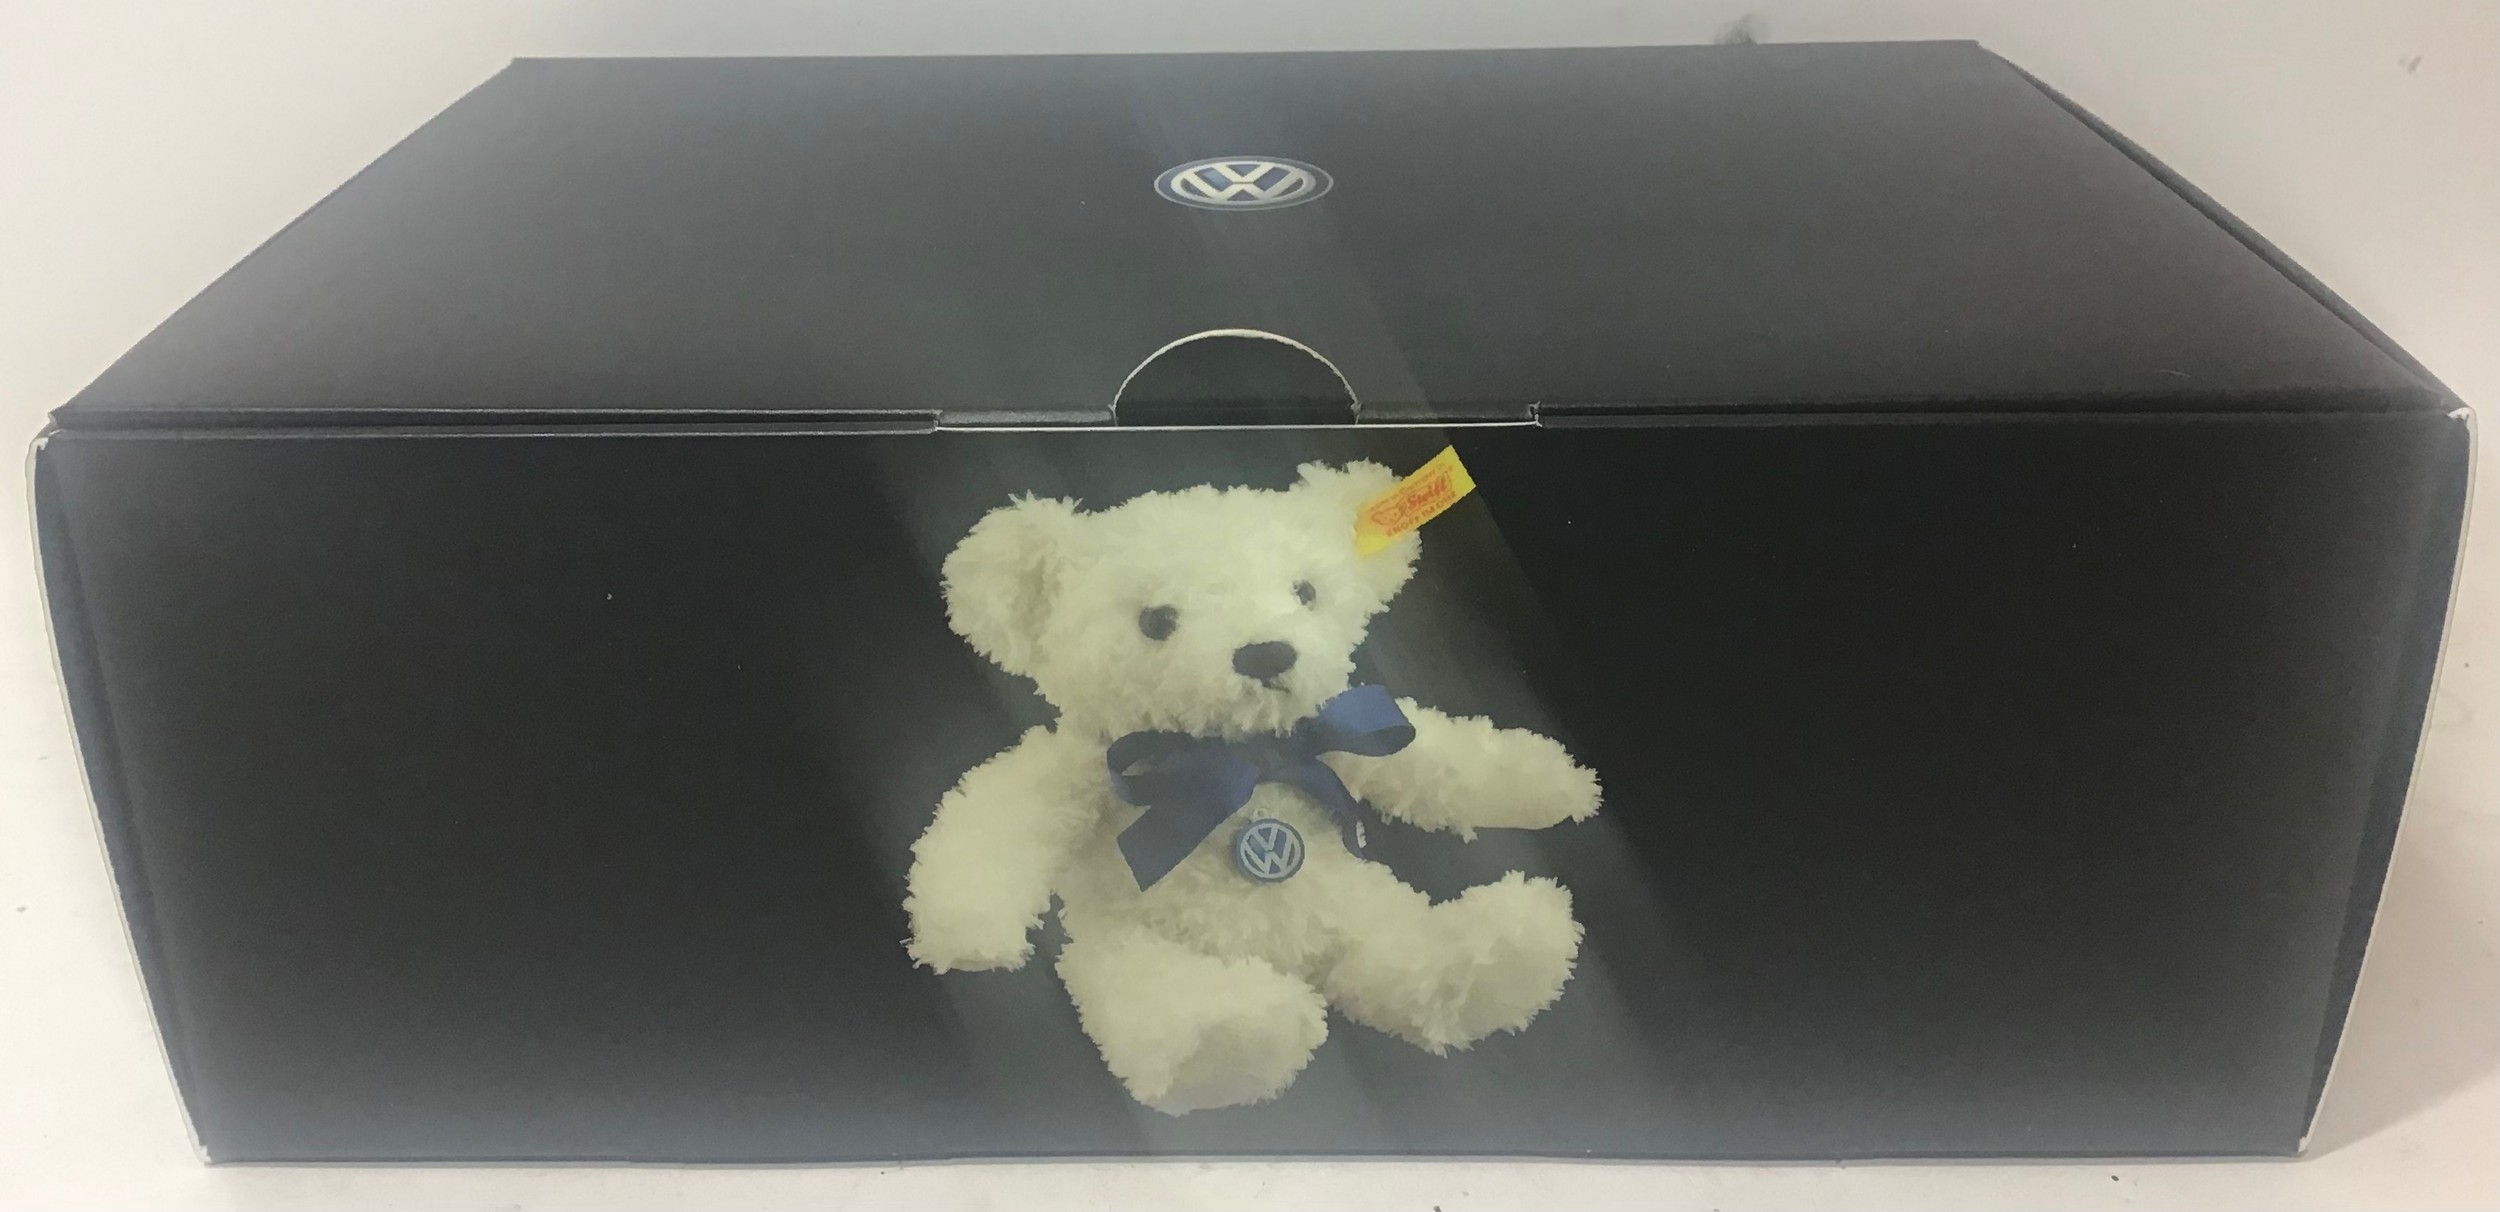 Steif Volkswagen Bear in Original Box Model No. 992407 from 2009 complete with Original Tags and - Image 5 of 5